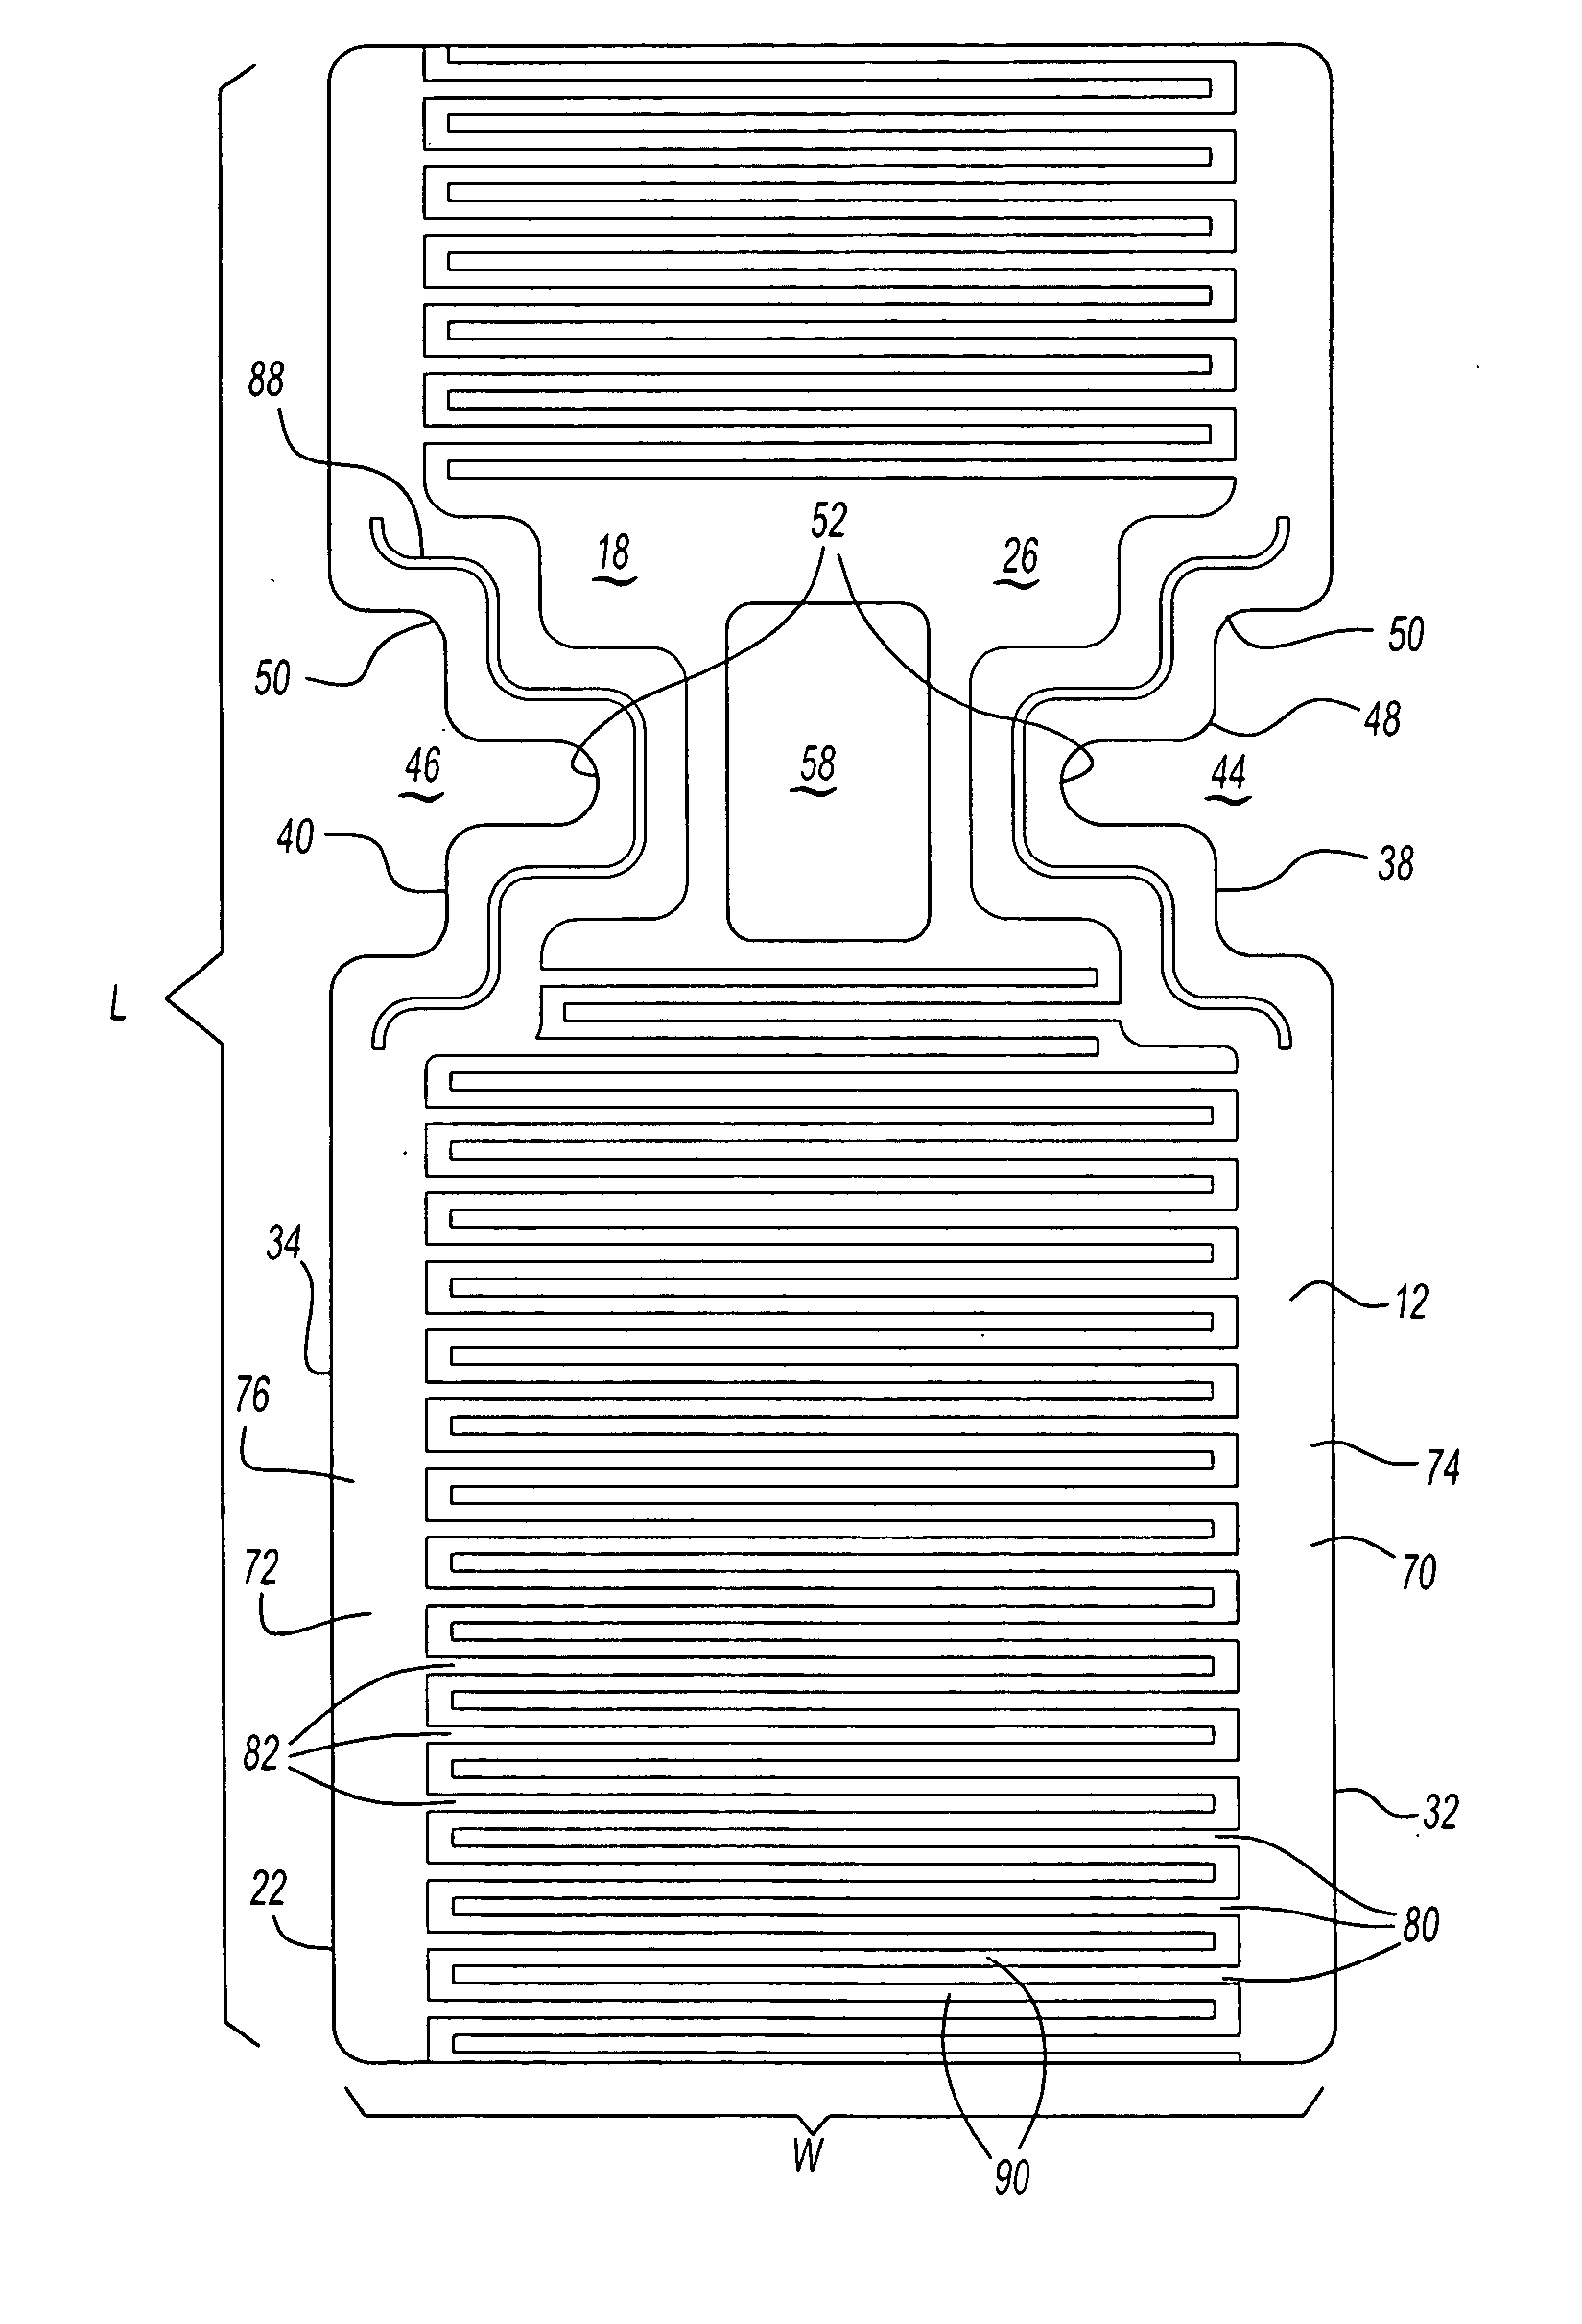 Heater for an automotive vehicle and method of forming same